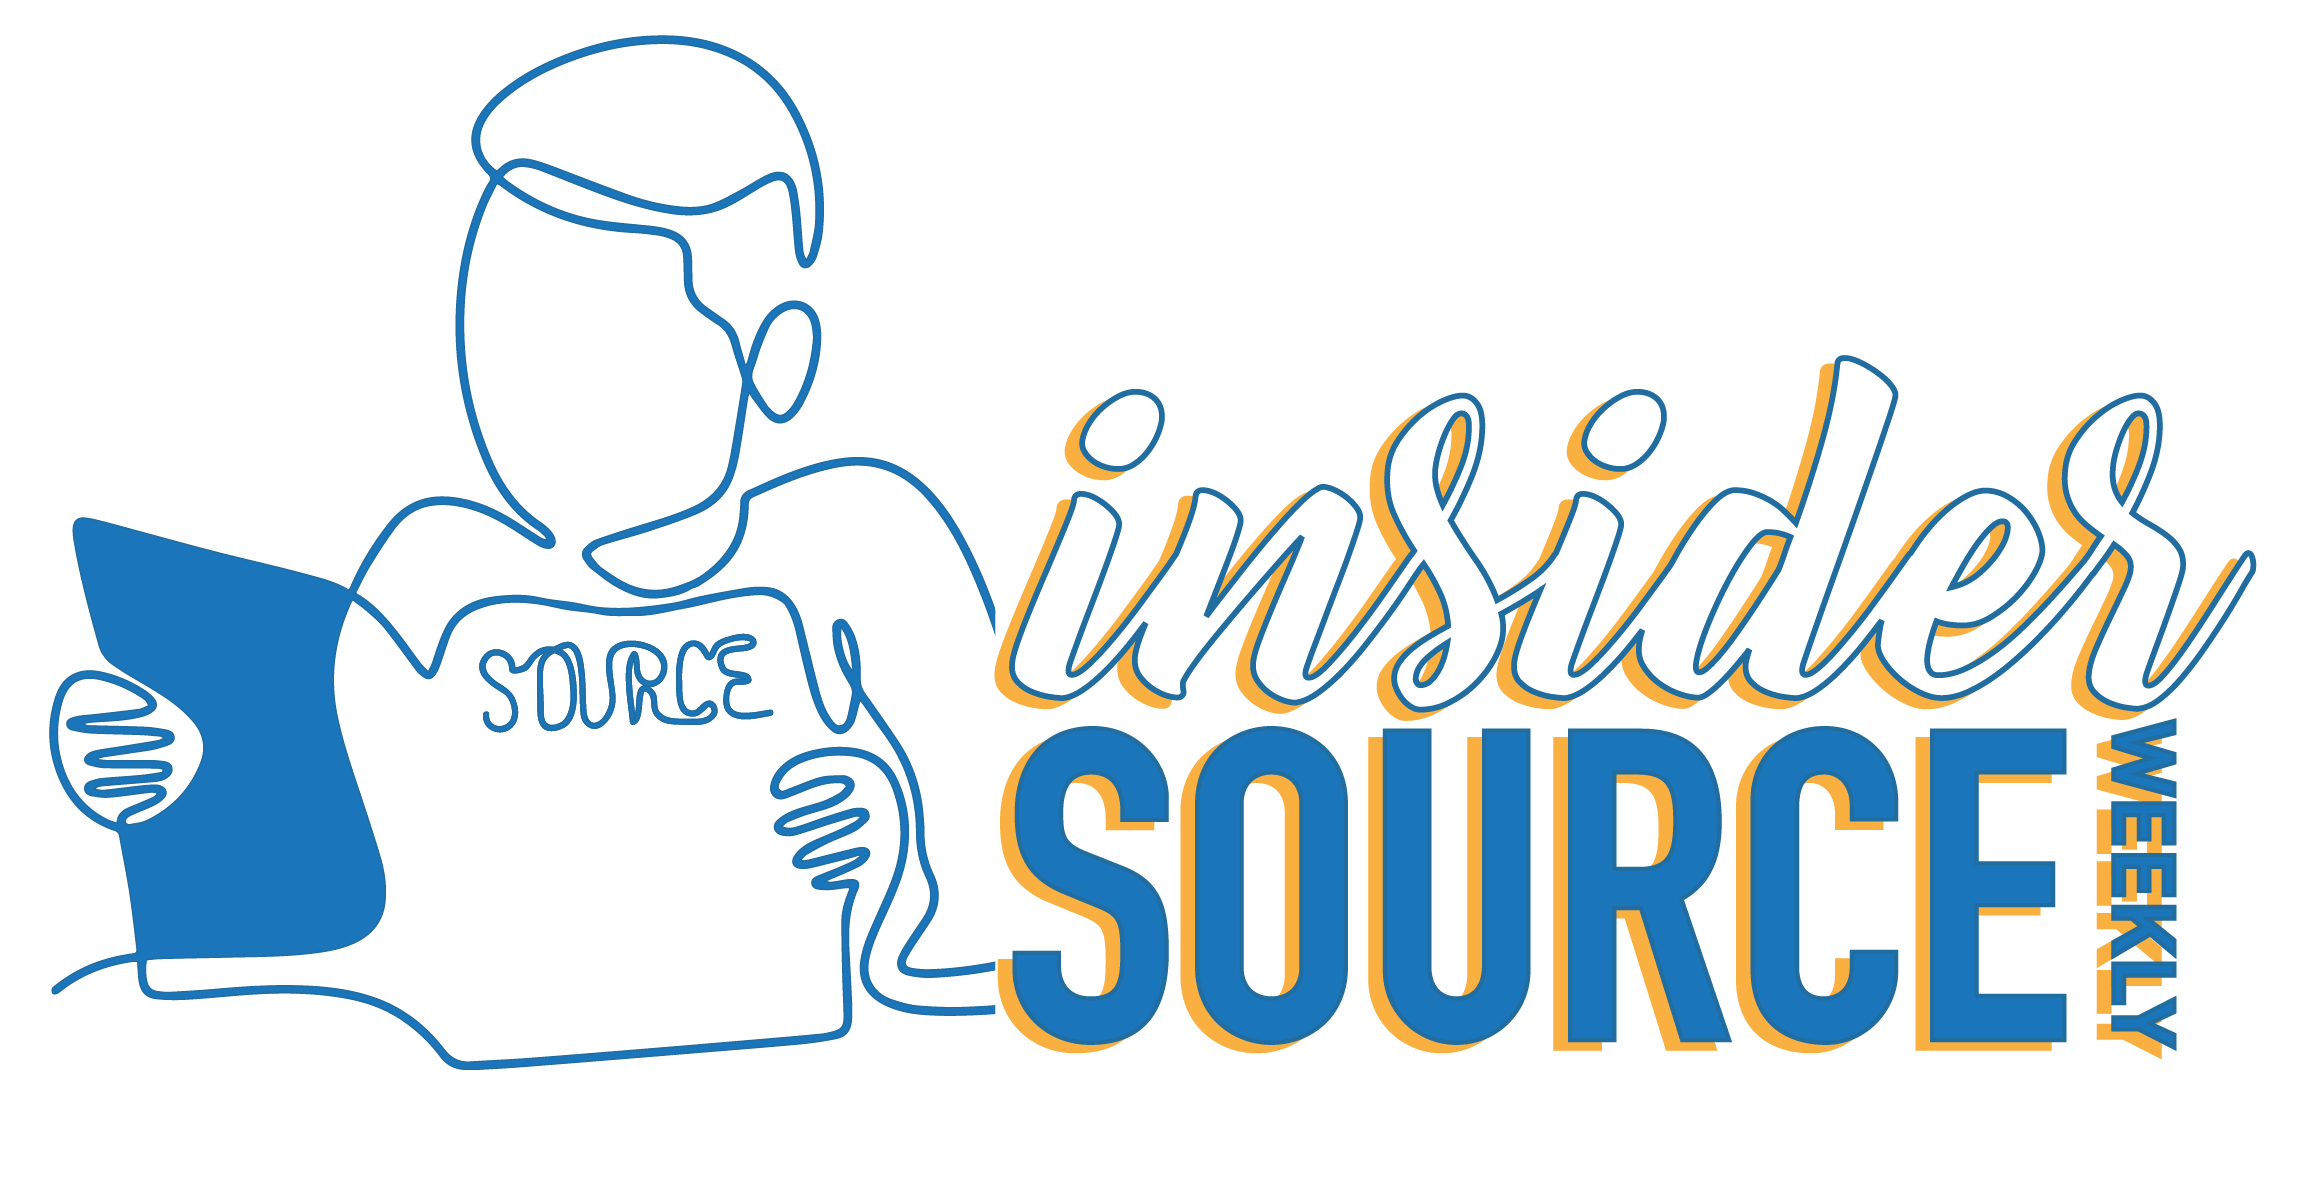 Source Weekly Insider